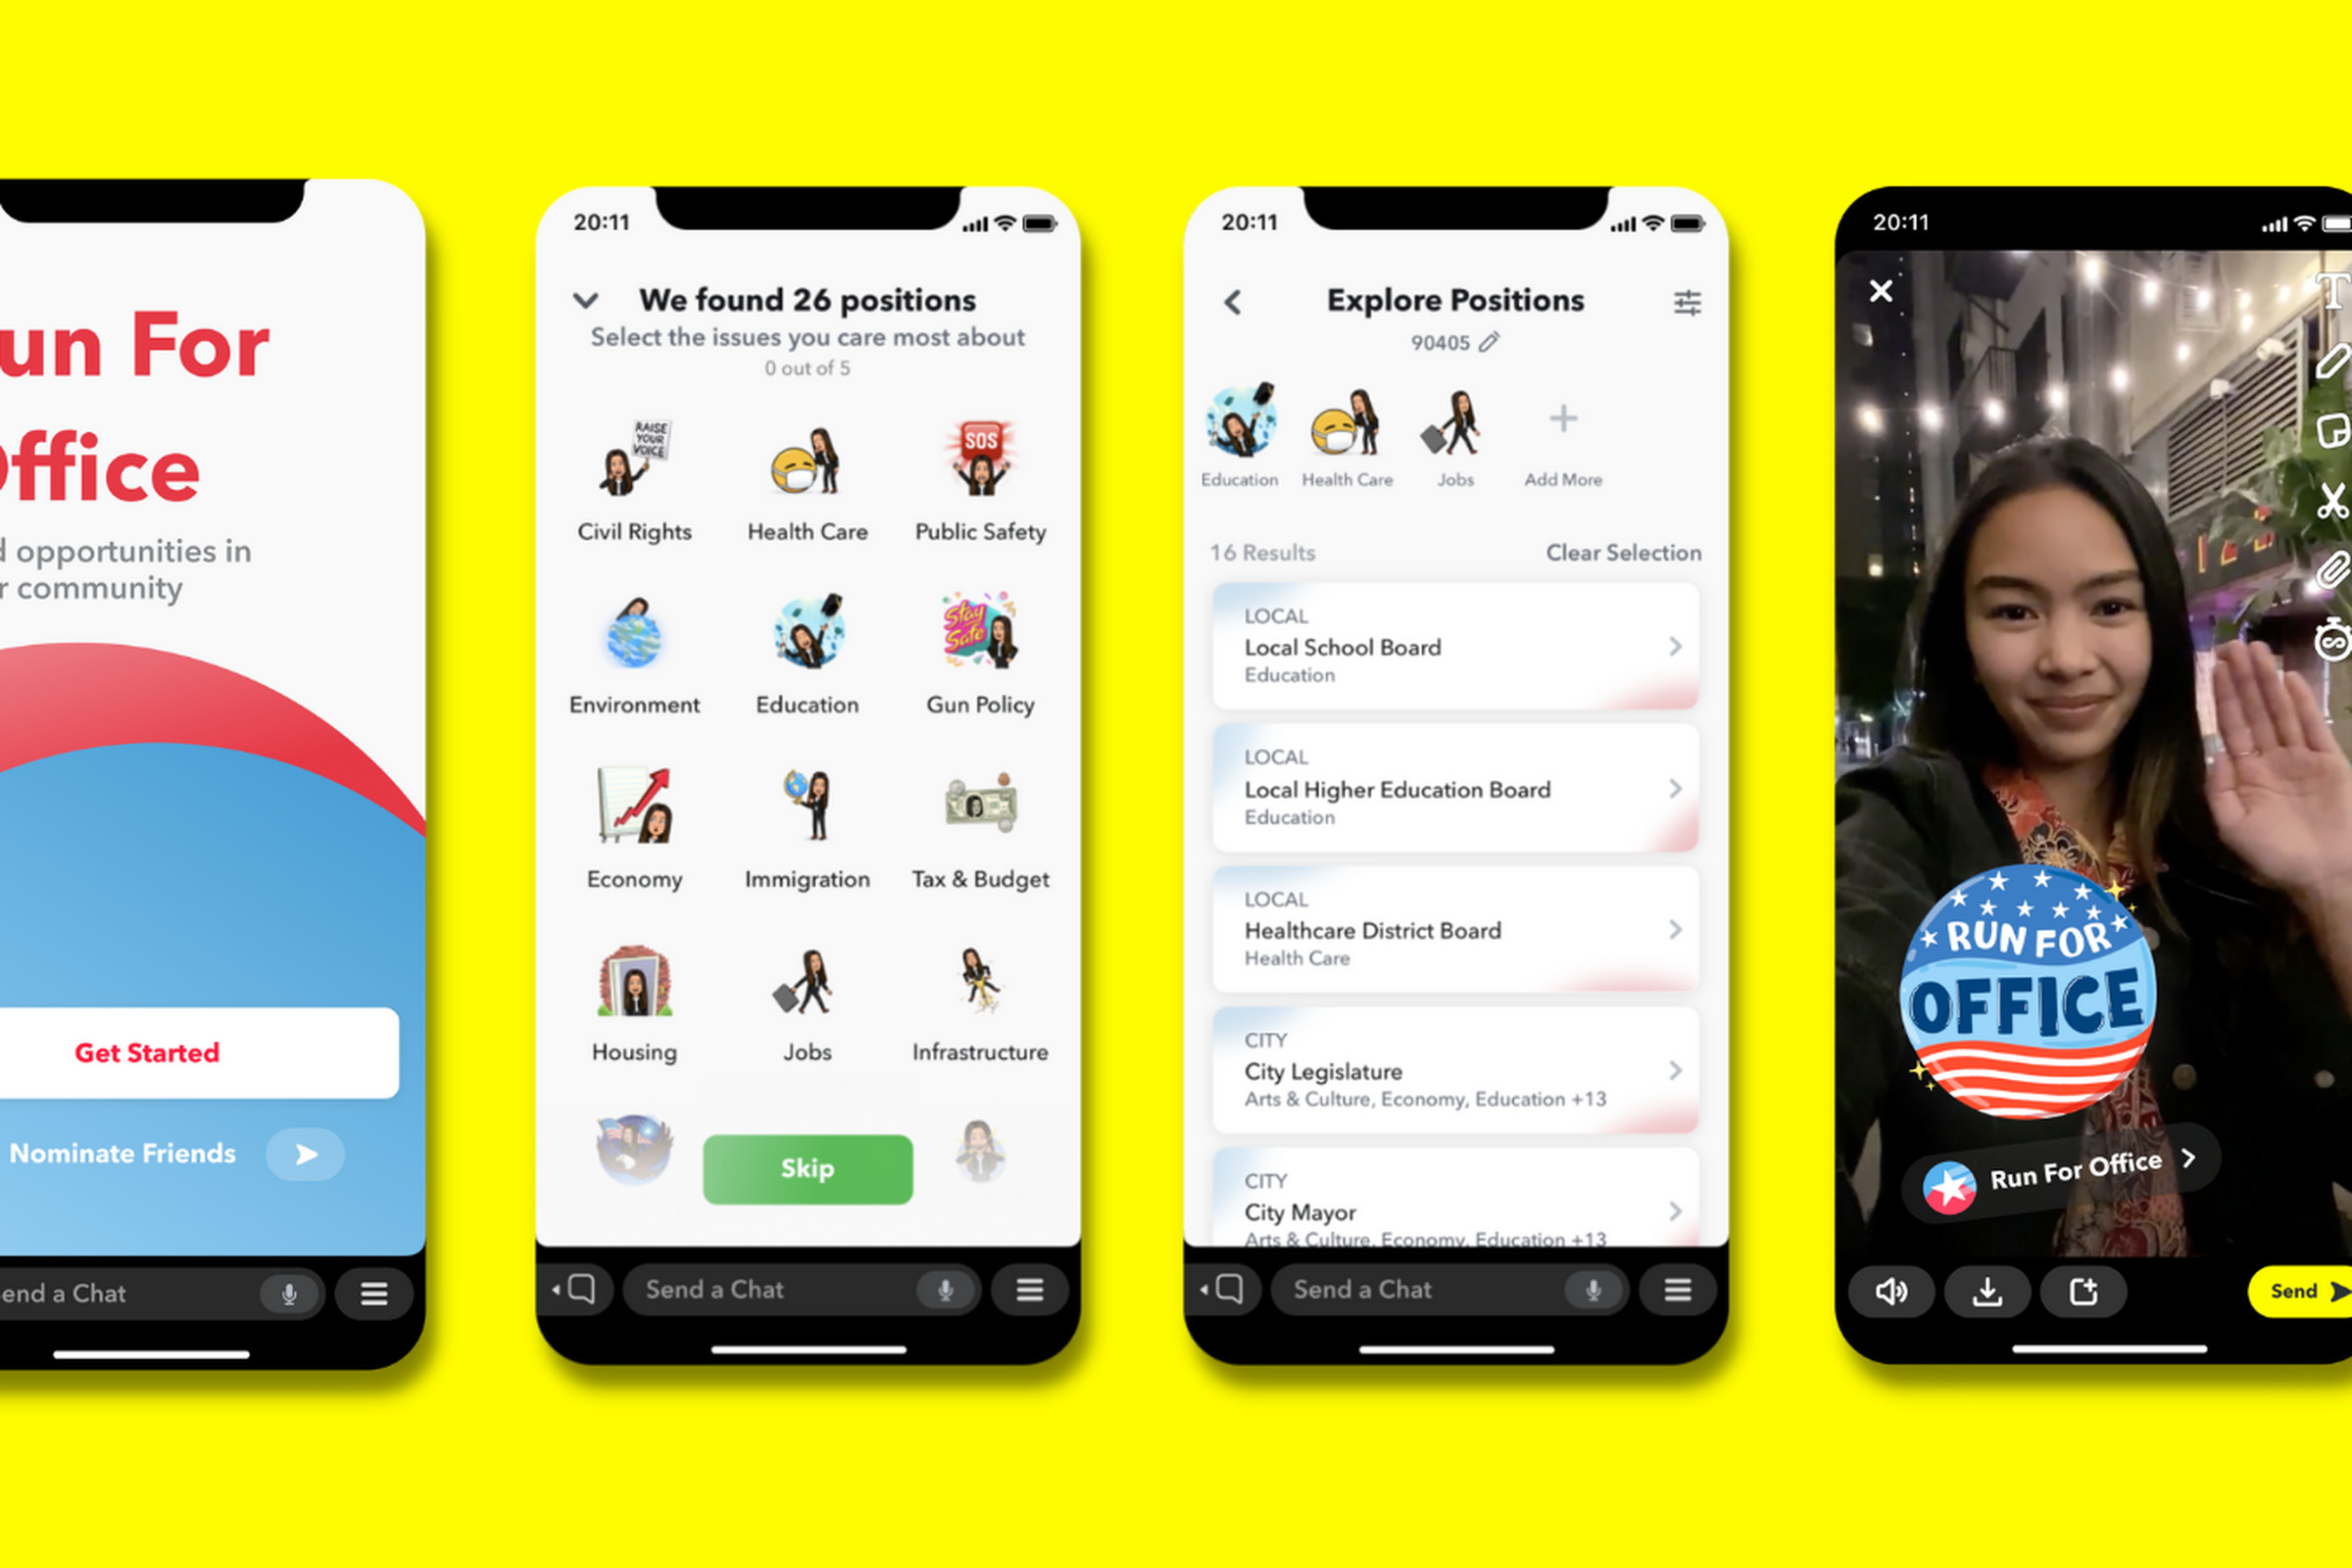 Snapchat has introduced tools to help users run for office